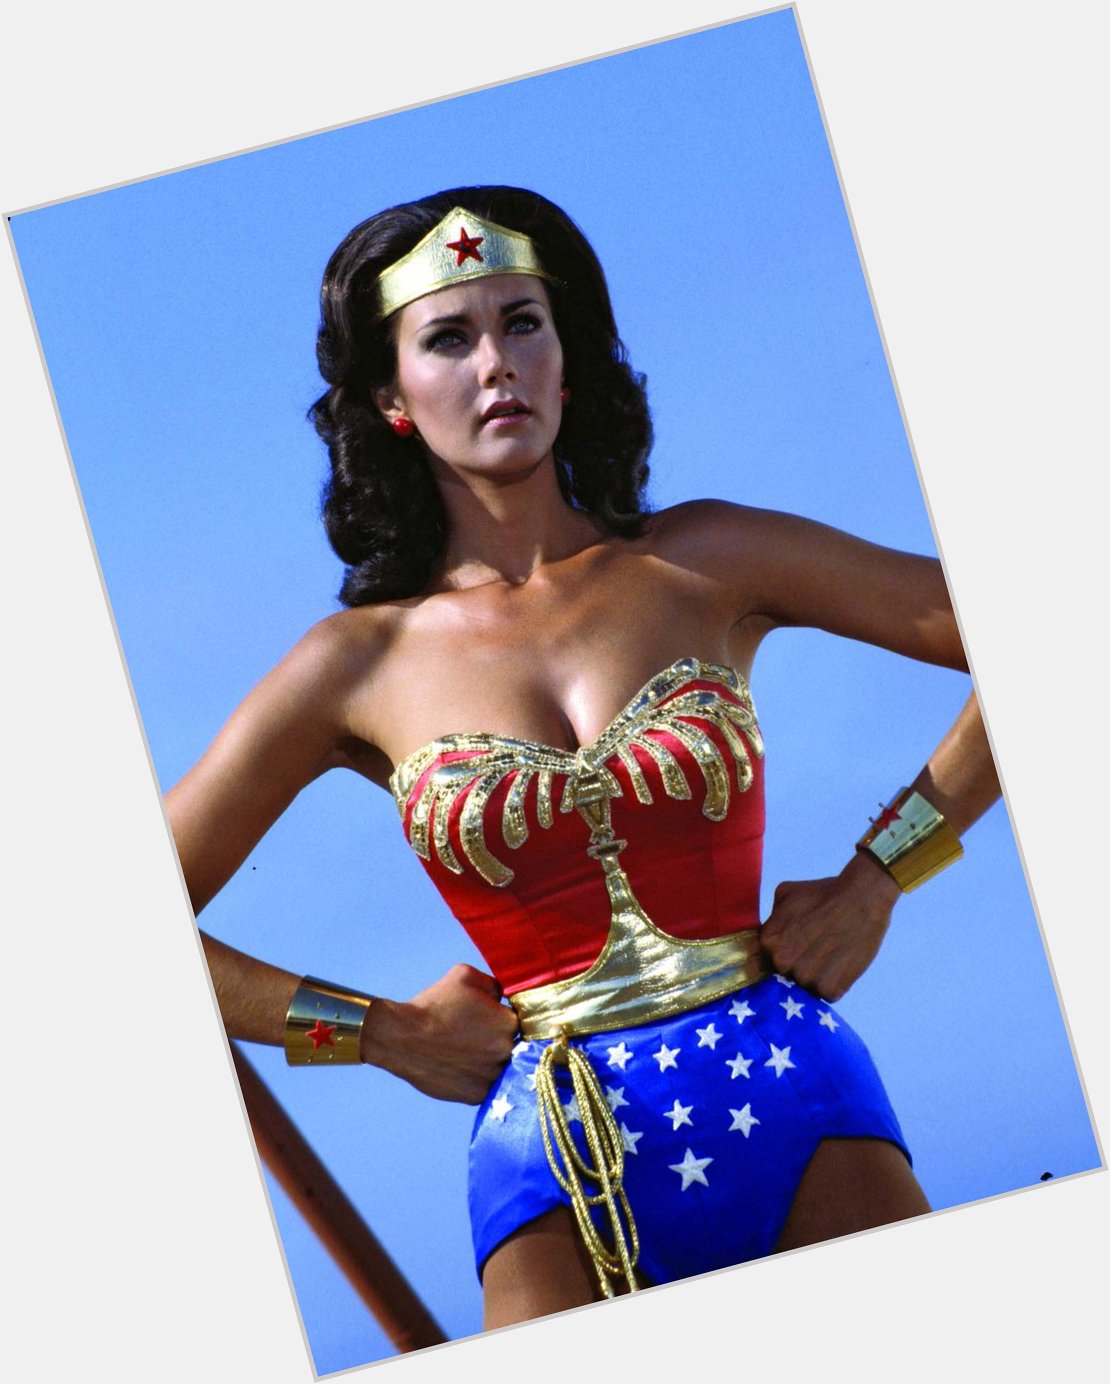  Happy birthday to you! Appropriately, you share your birthday with Lynda Carter. Two Wonder Women! 